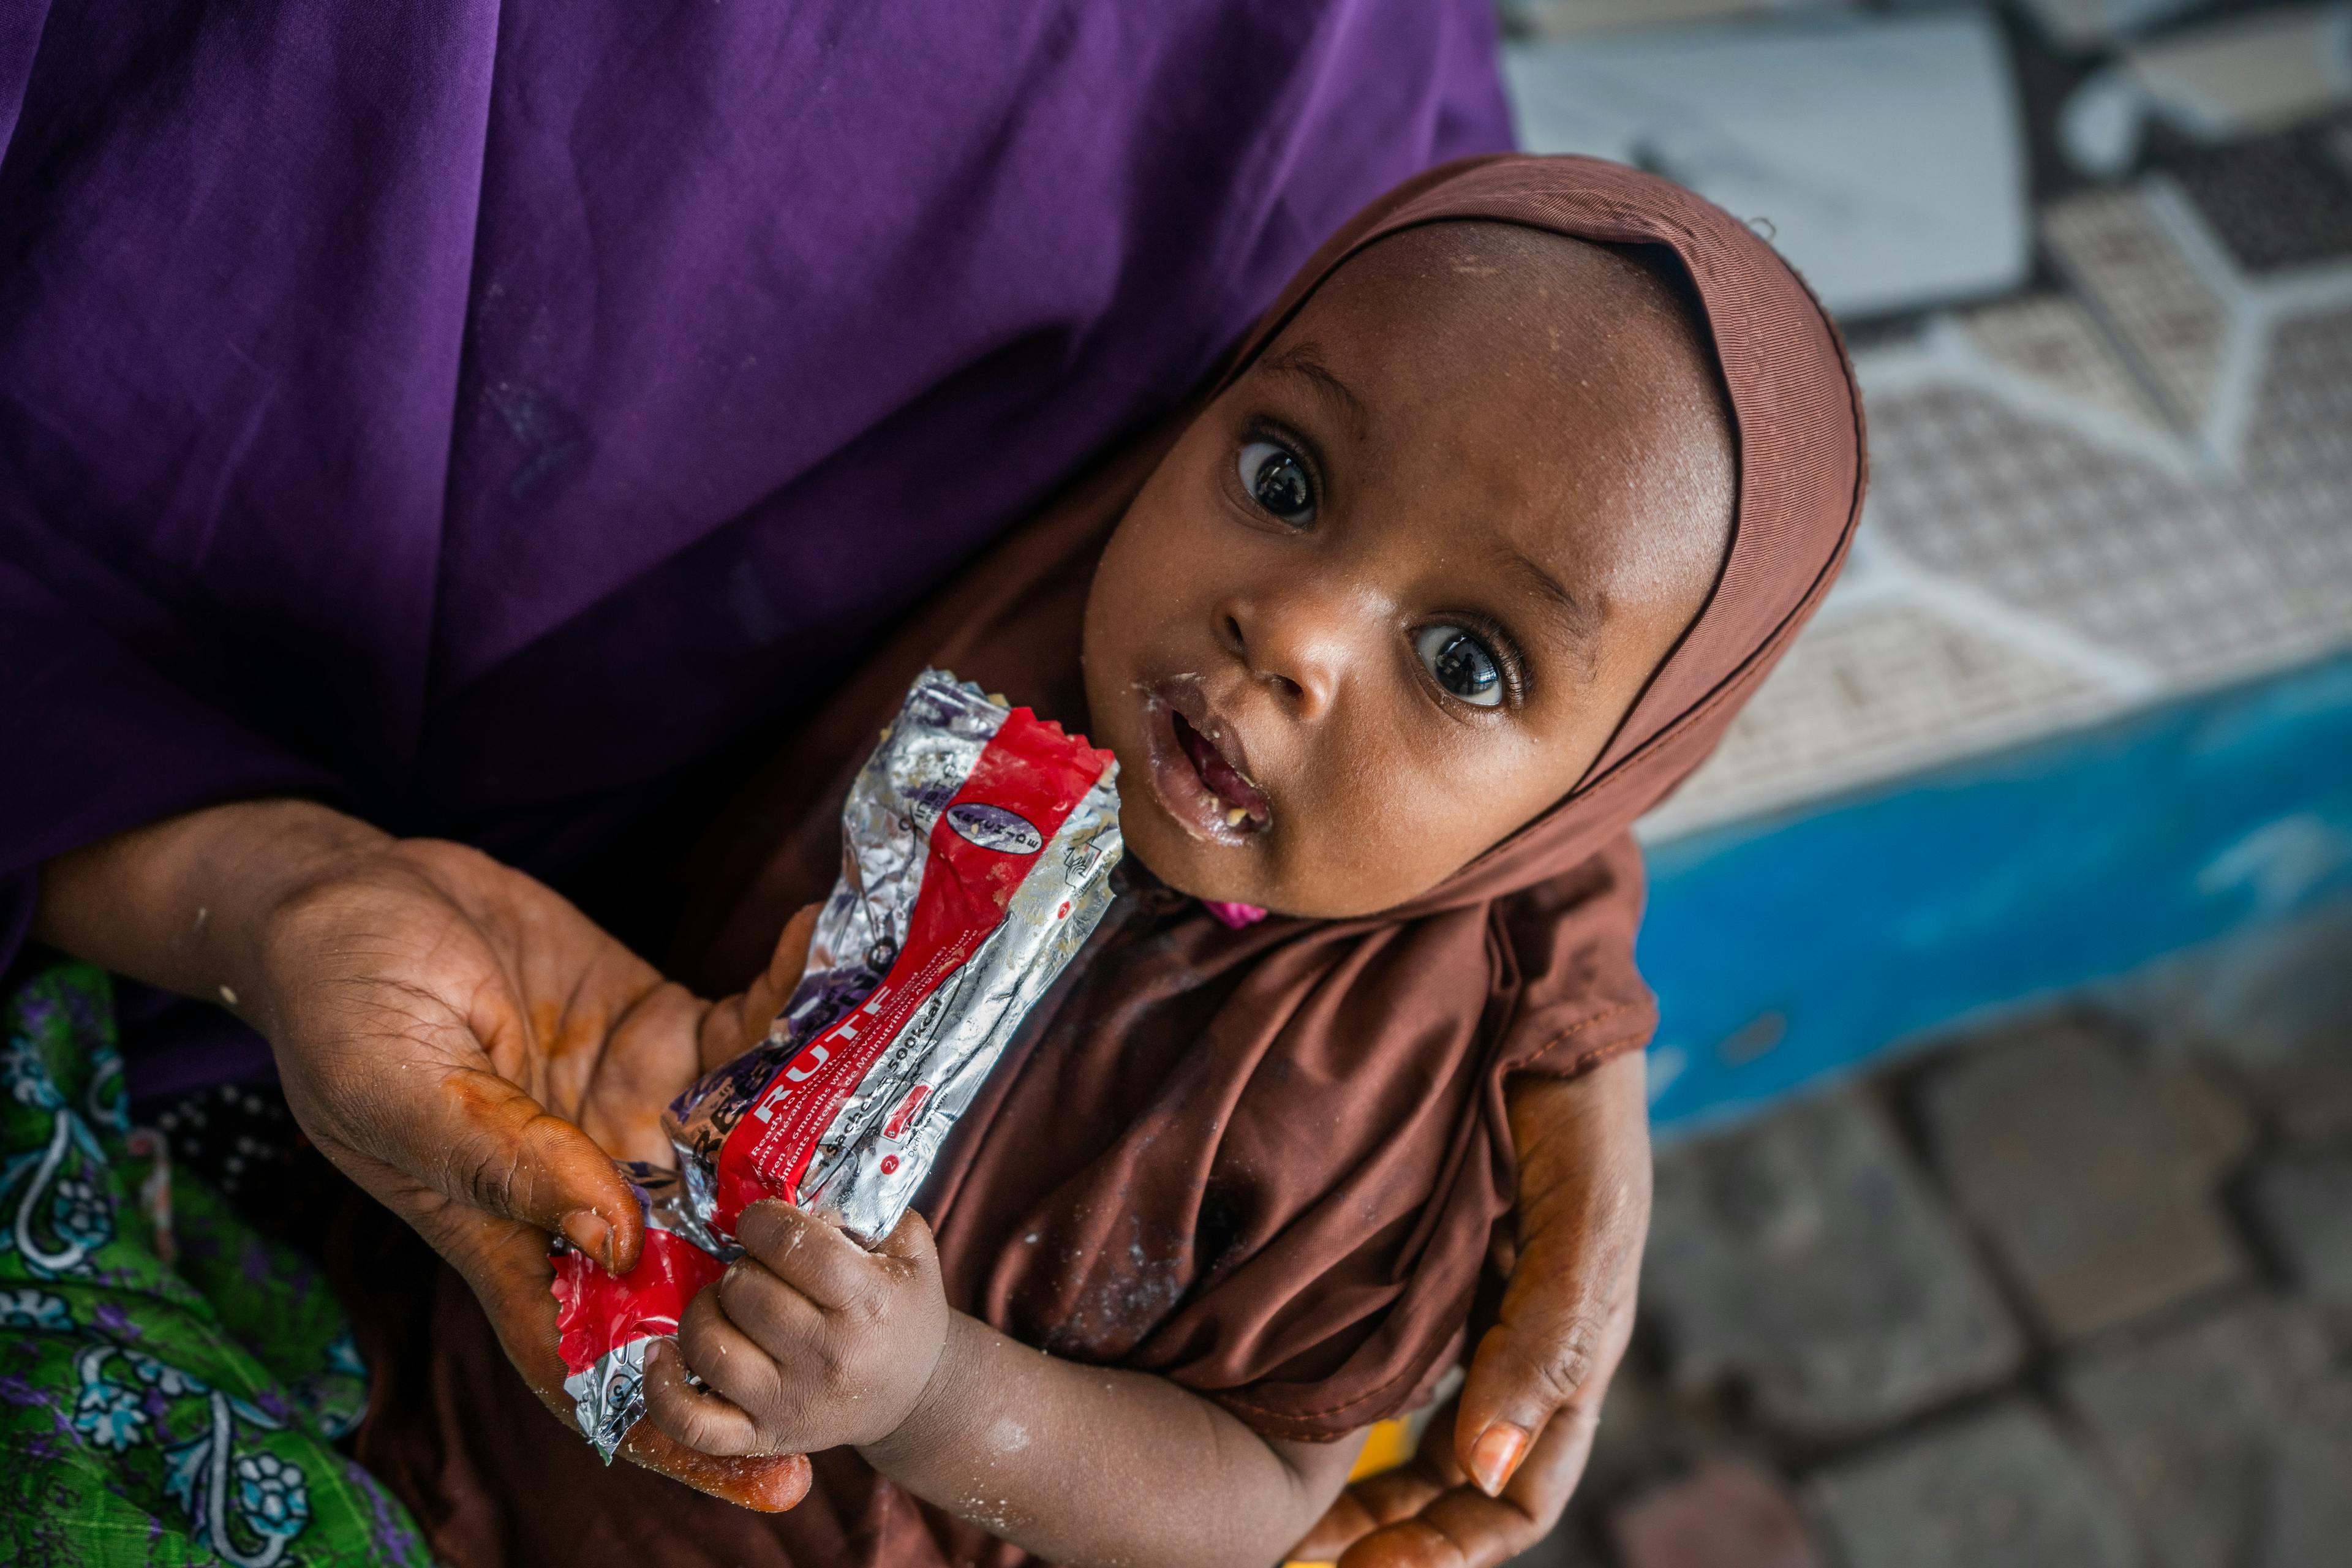 Catching signs of malnutrition early - a child receives RUTF treatment